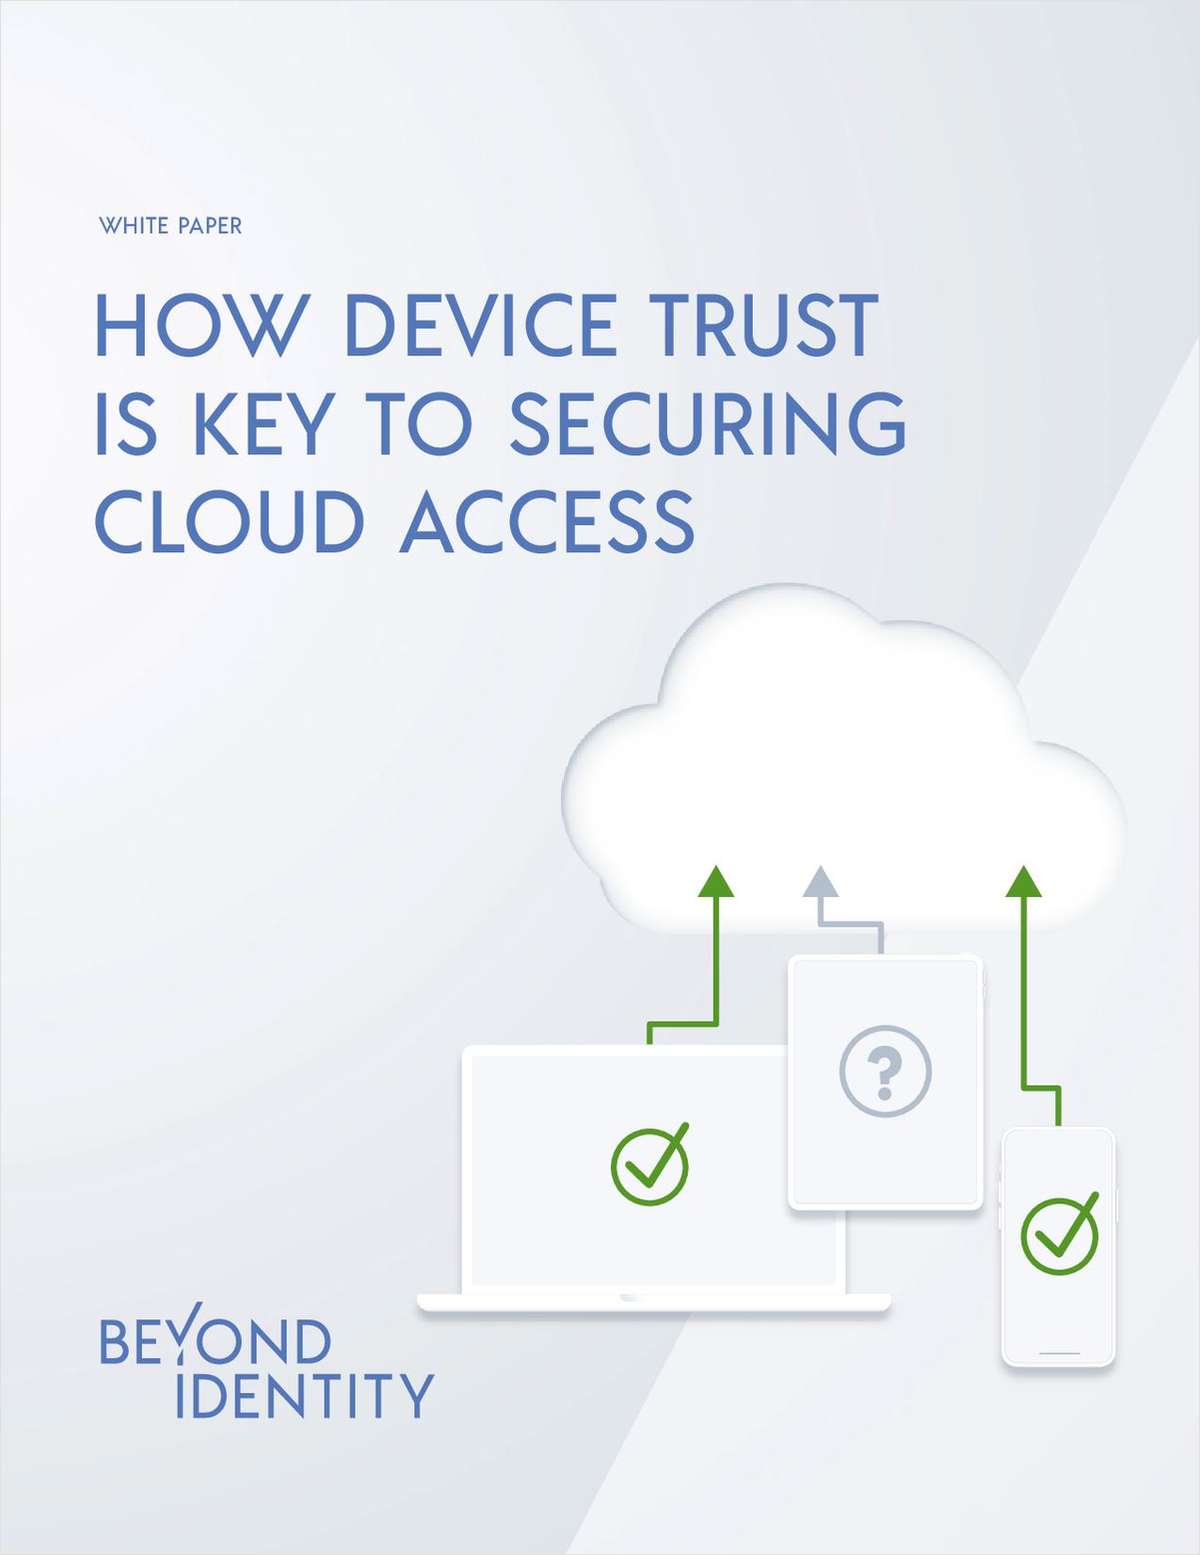 How Device Trust is Key to Securing Cloud Access